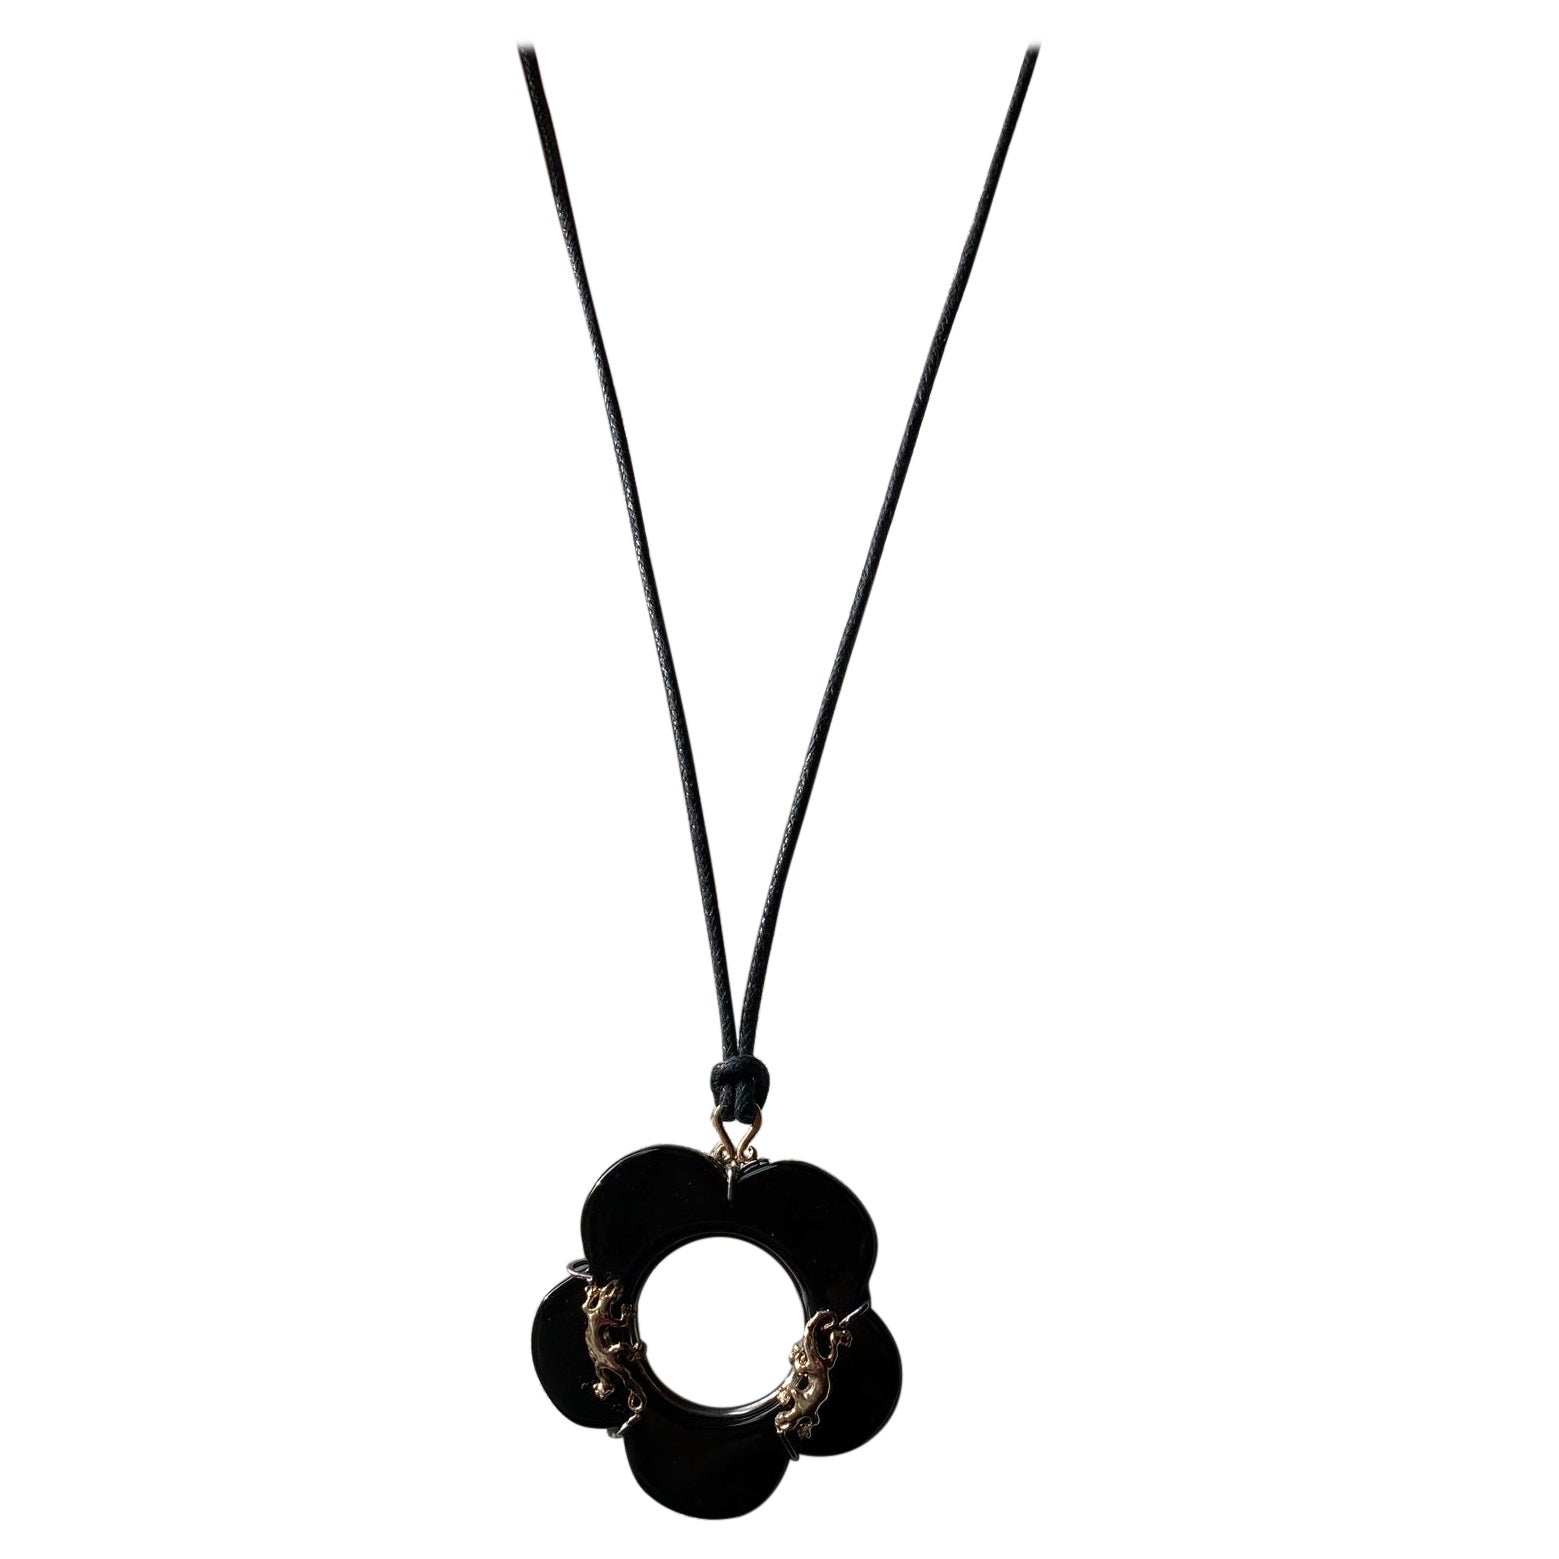 Onyx Flower Necklace Pendent 24 karat Gold Plated Silver Sterling Rope Necklace For Sale